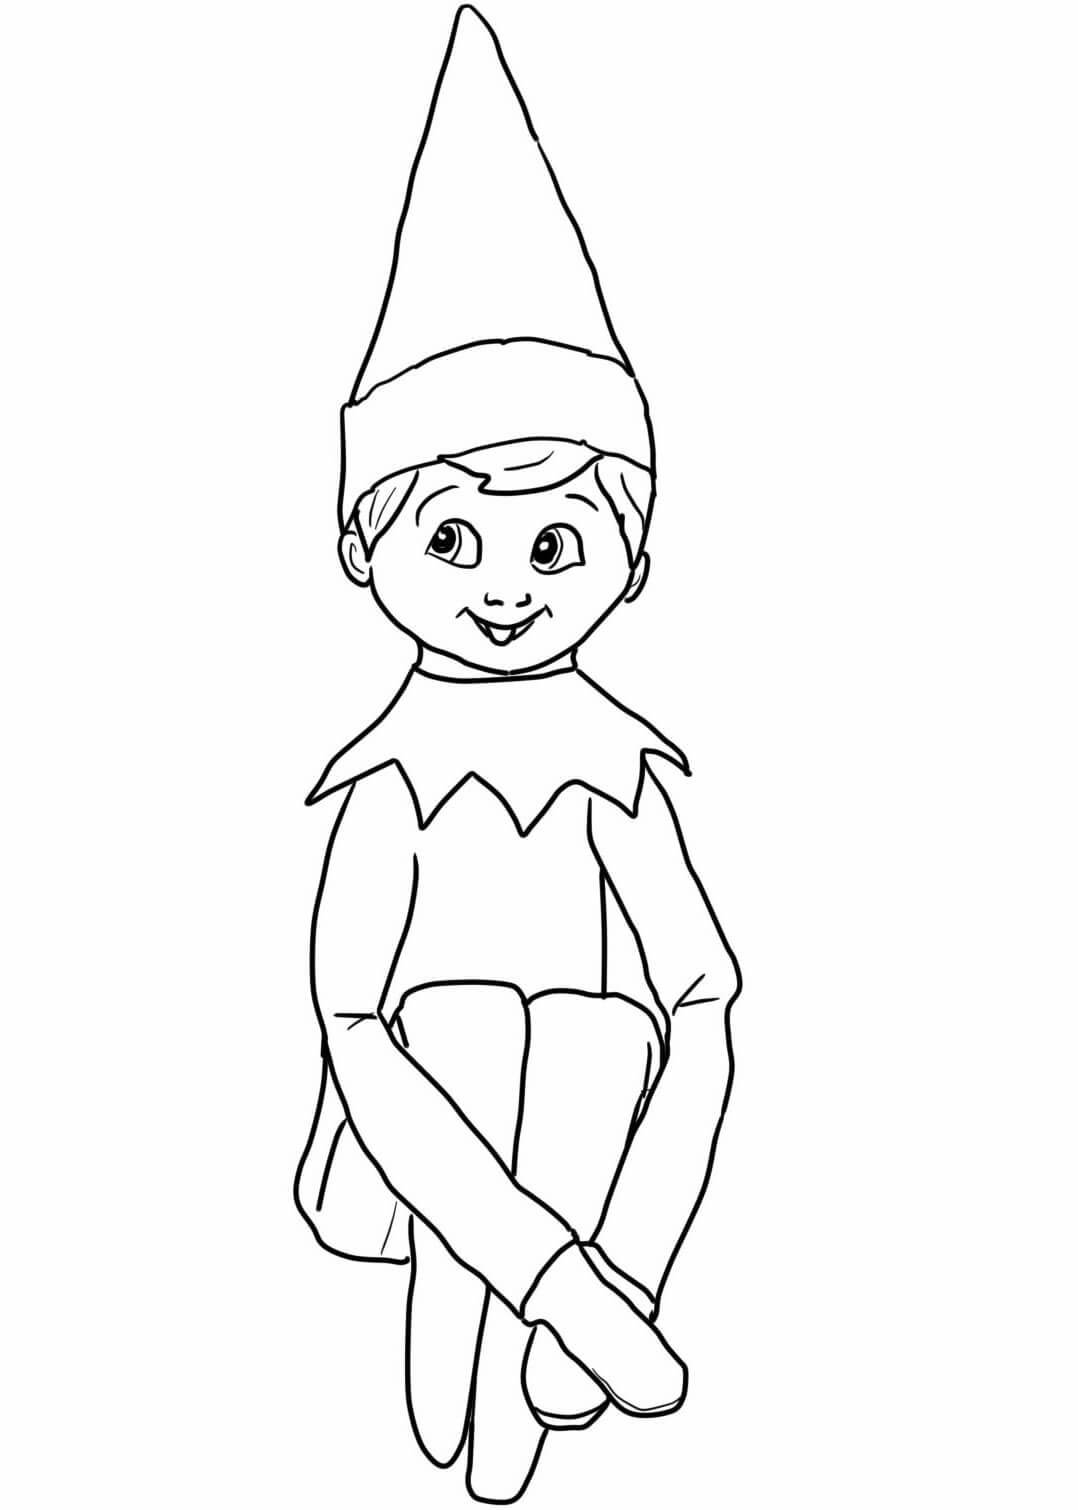 Elf on the Shelf Coloring Pages.